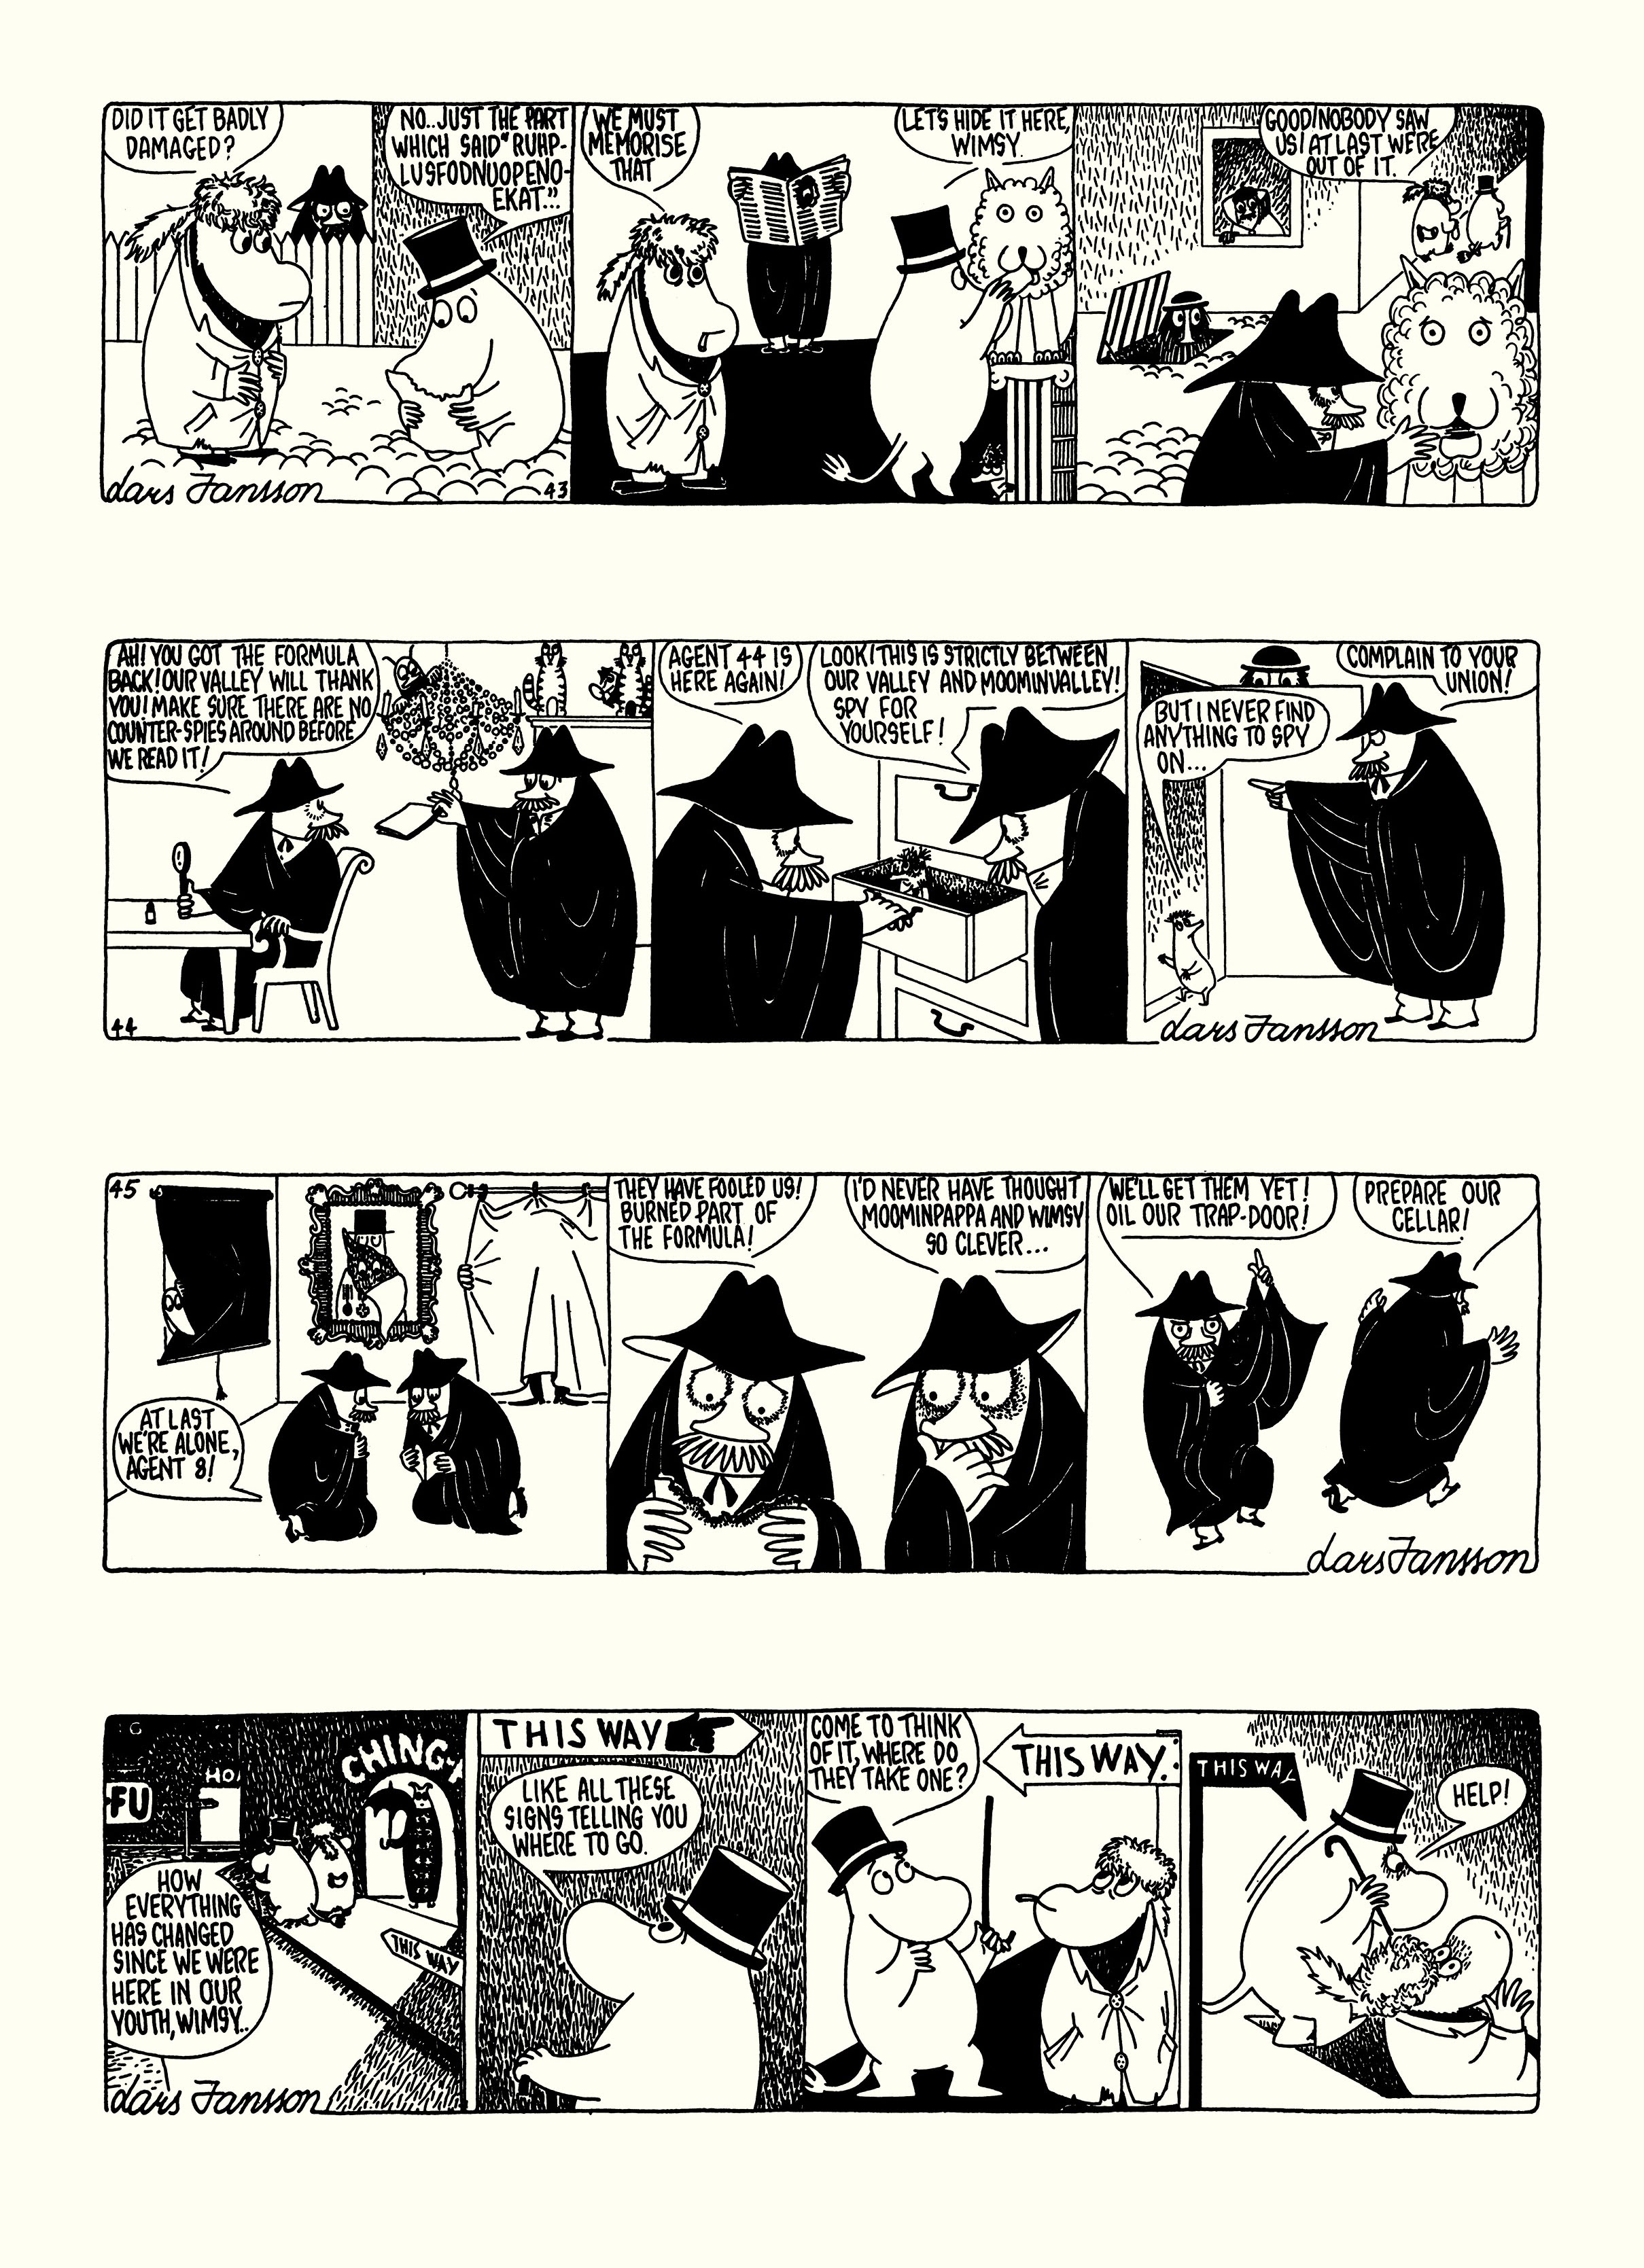 Read online Moomin: The Complete Lars Jansson Comic Strip comic -  Issue # TPB 6 - 58